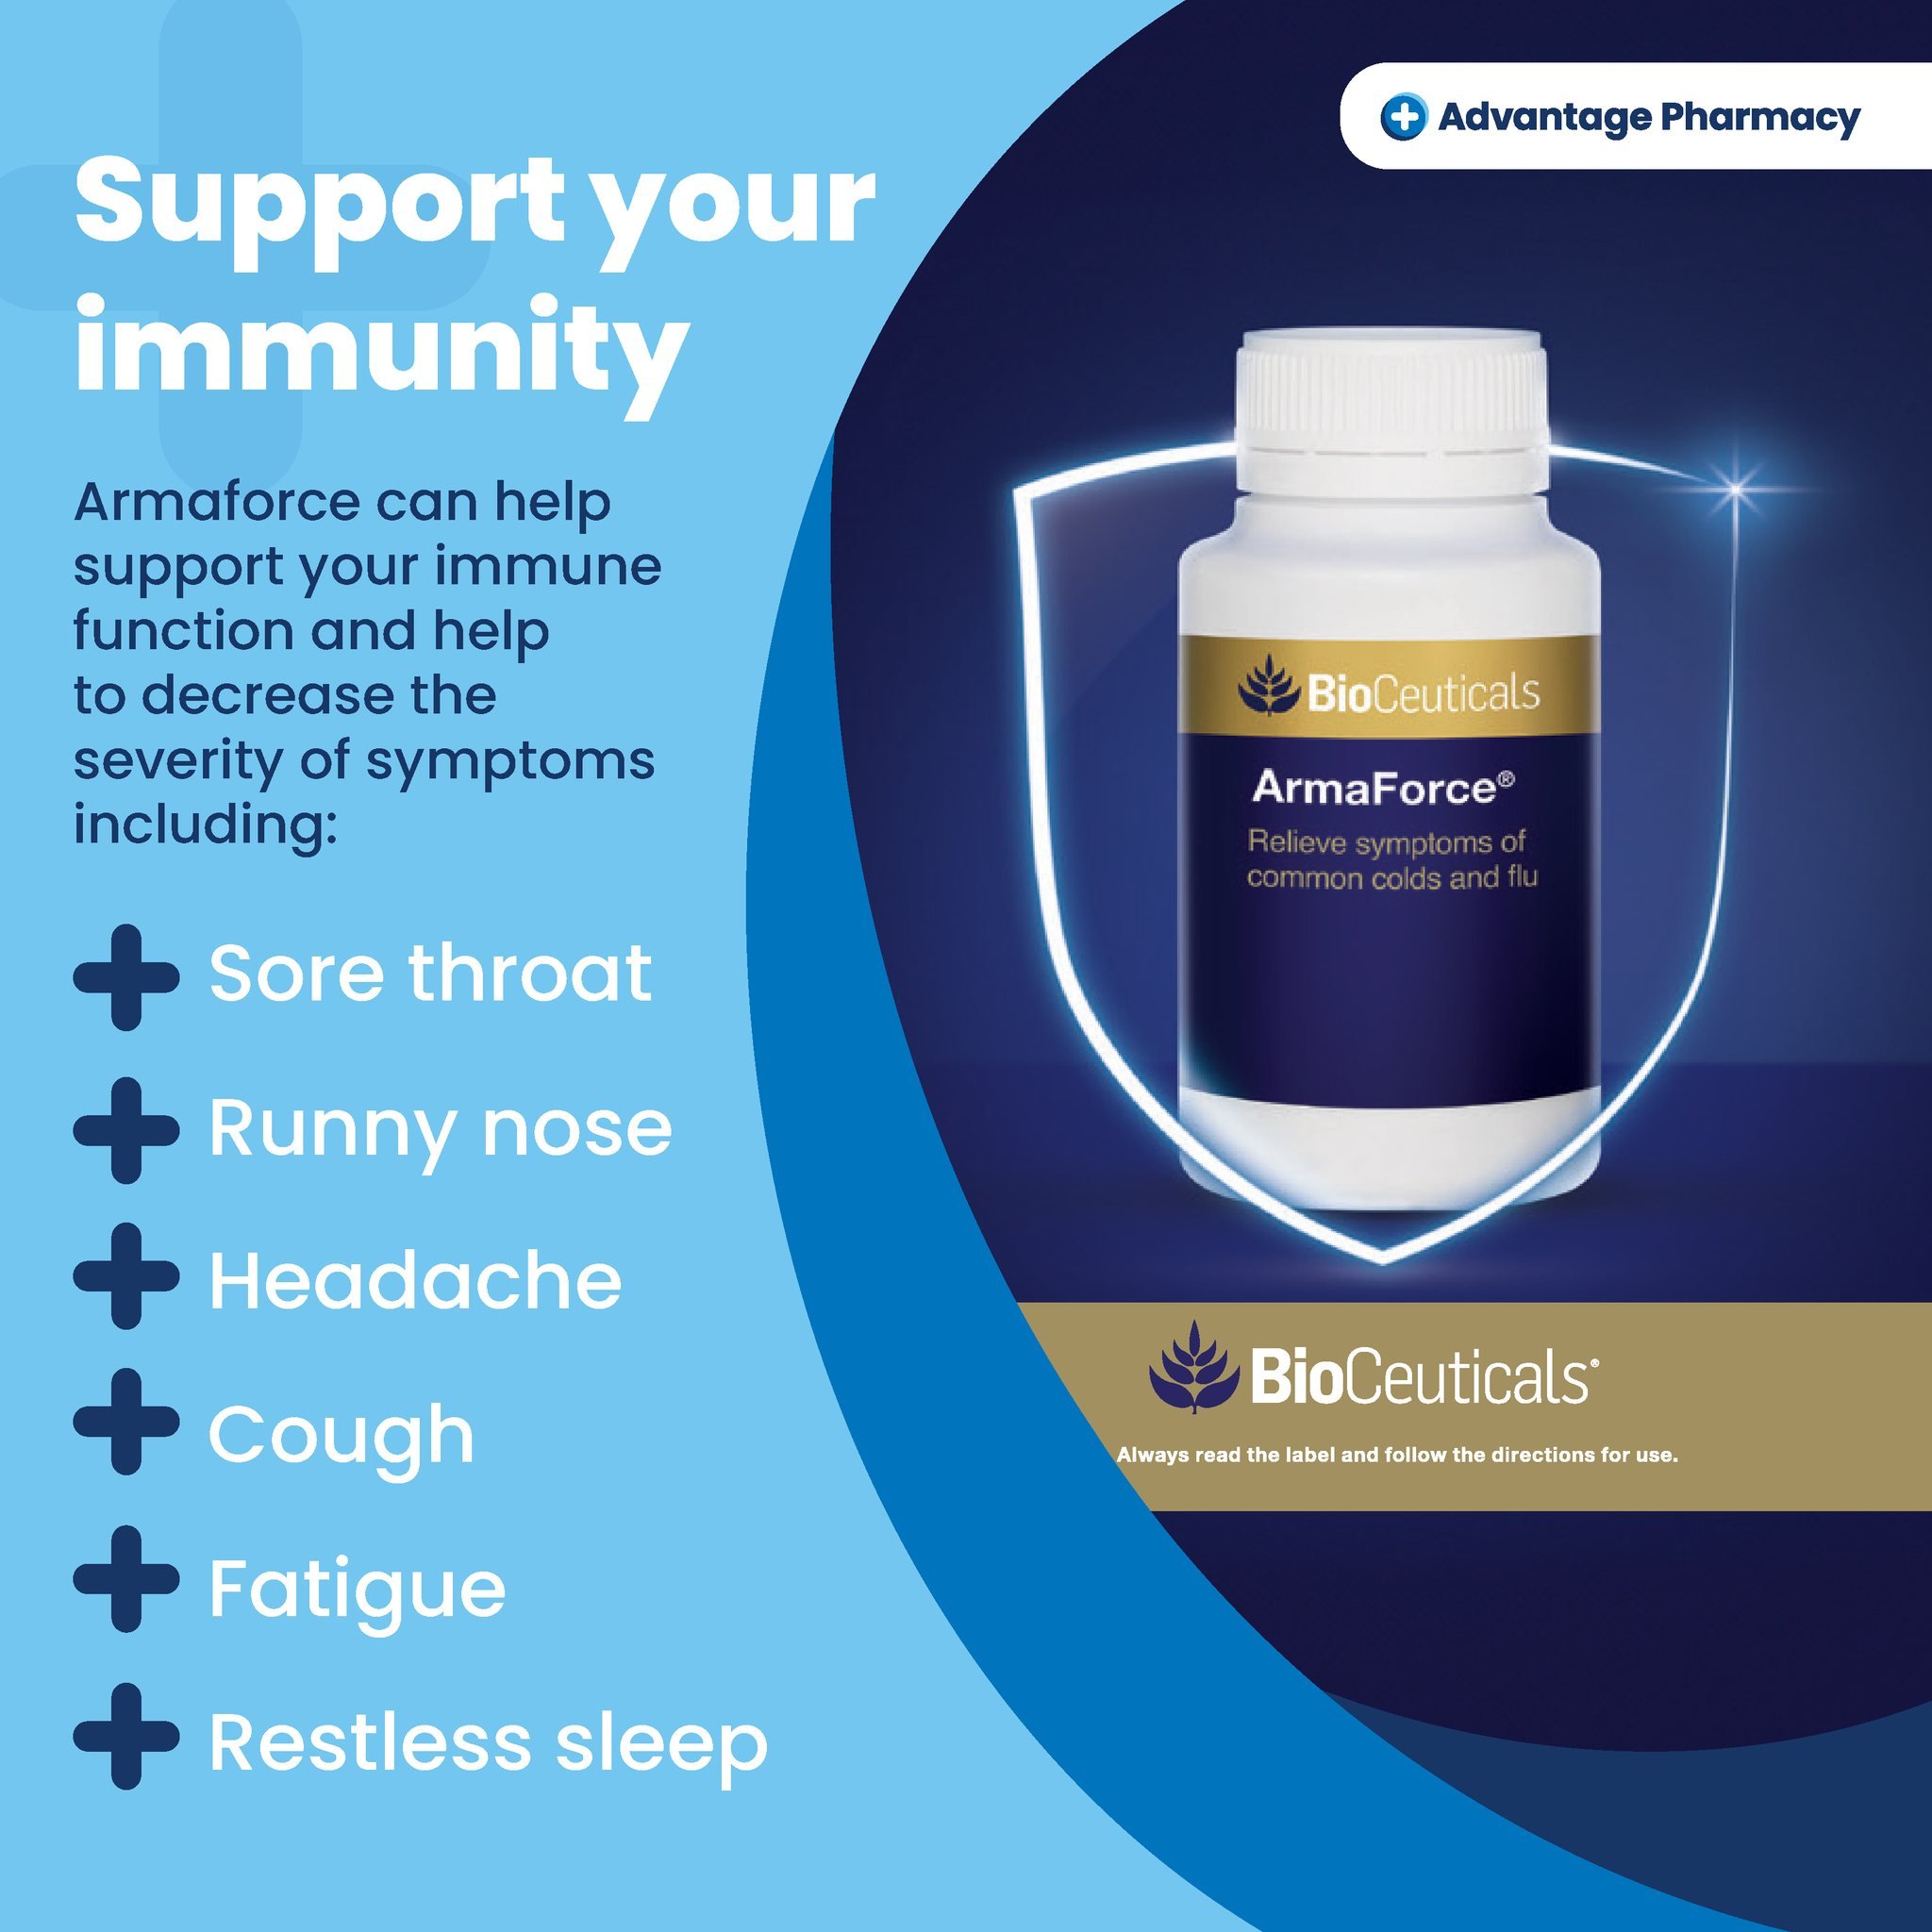 Your immune system is your body&rsquo;s most important defence against viruses and bacteria. Armaforce can help support your immune function and help to decrease the severity of symptoms of mild upper respiratory tract infections, including*:
🛡Sore 